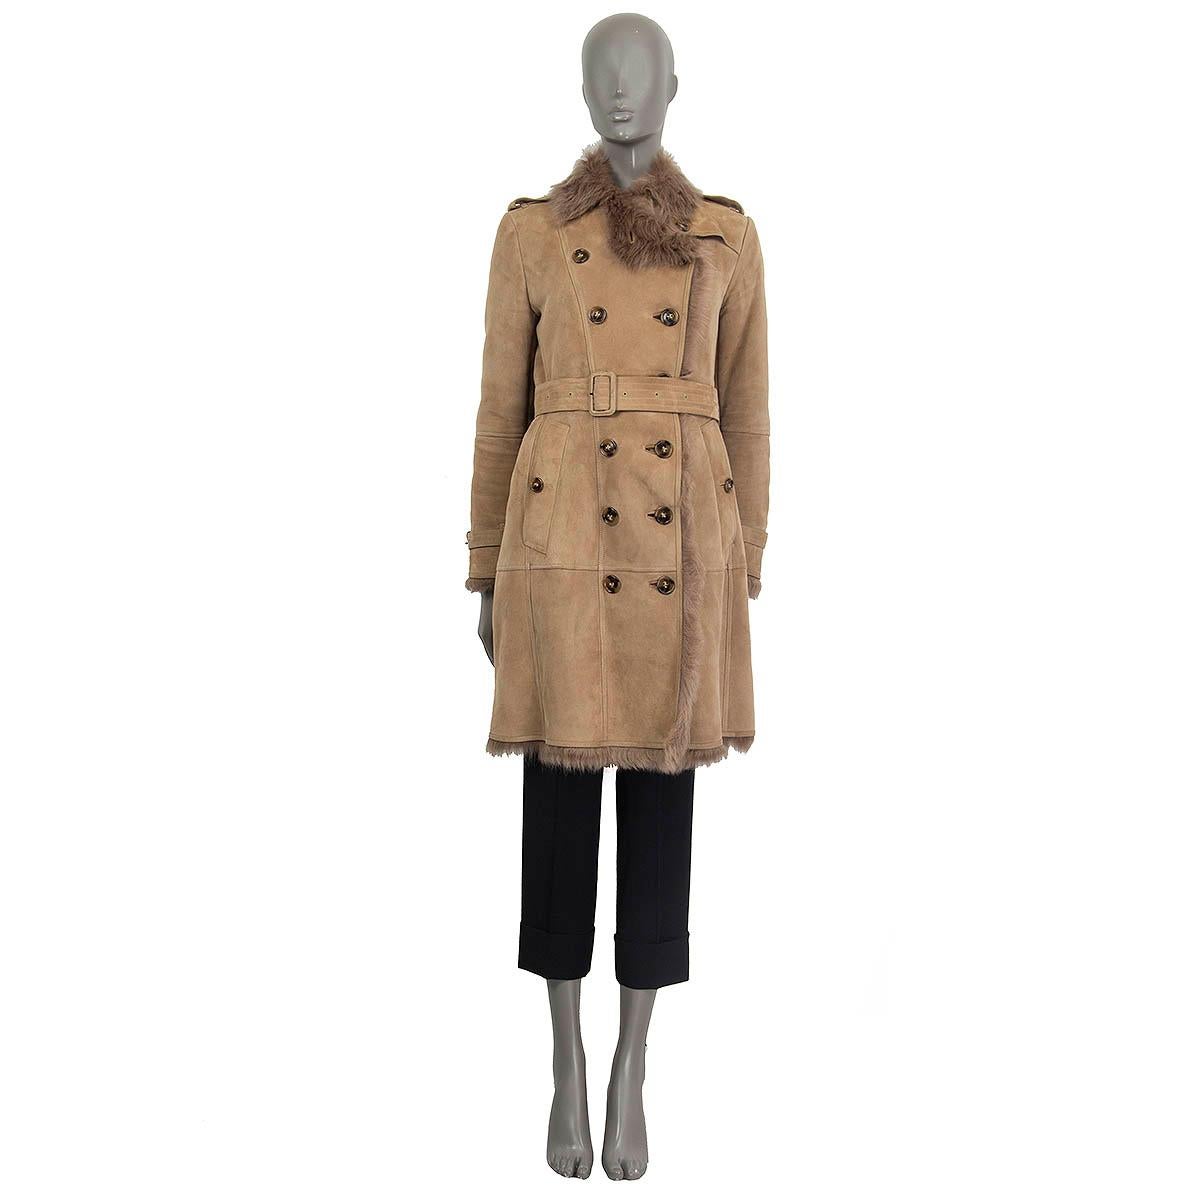 100% authentic Burberry London double breasted trench coat in beige lamb shearling (100%). Features a detachable belt, epaulettes at the shoulders and the cuffs and two buttoned pockets on the front. Opens with eight buttons on the front. Pockets